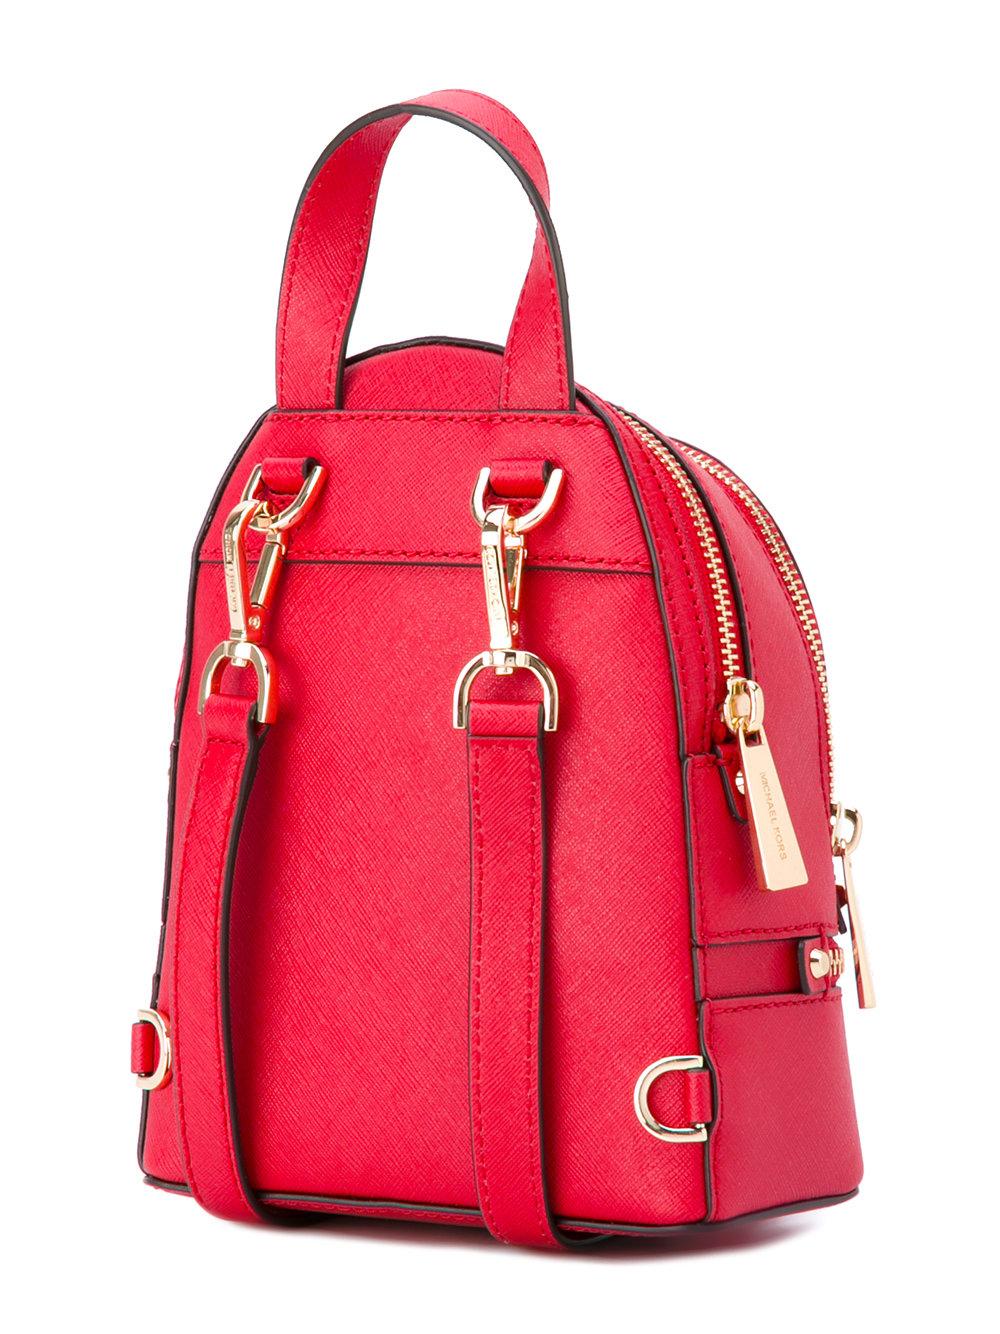 MICHAEL Michael Kors Leather Rhea Extra Small Backpack in Red - Lyst